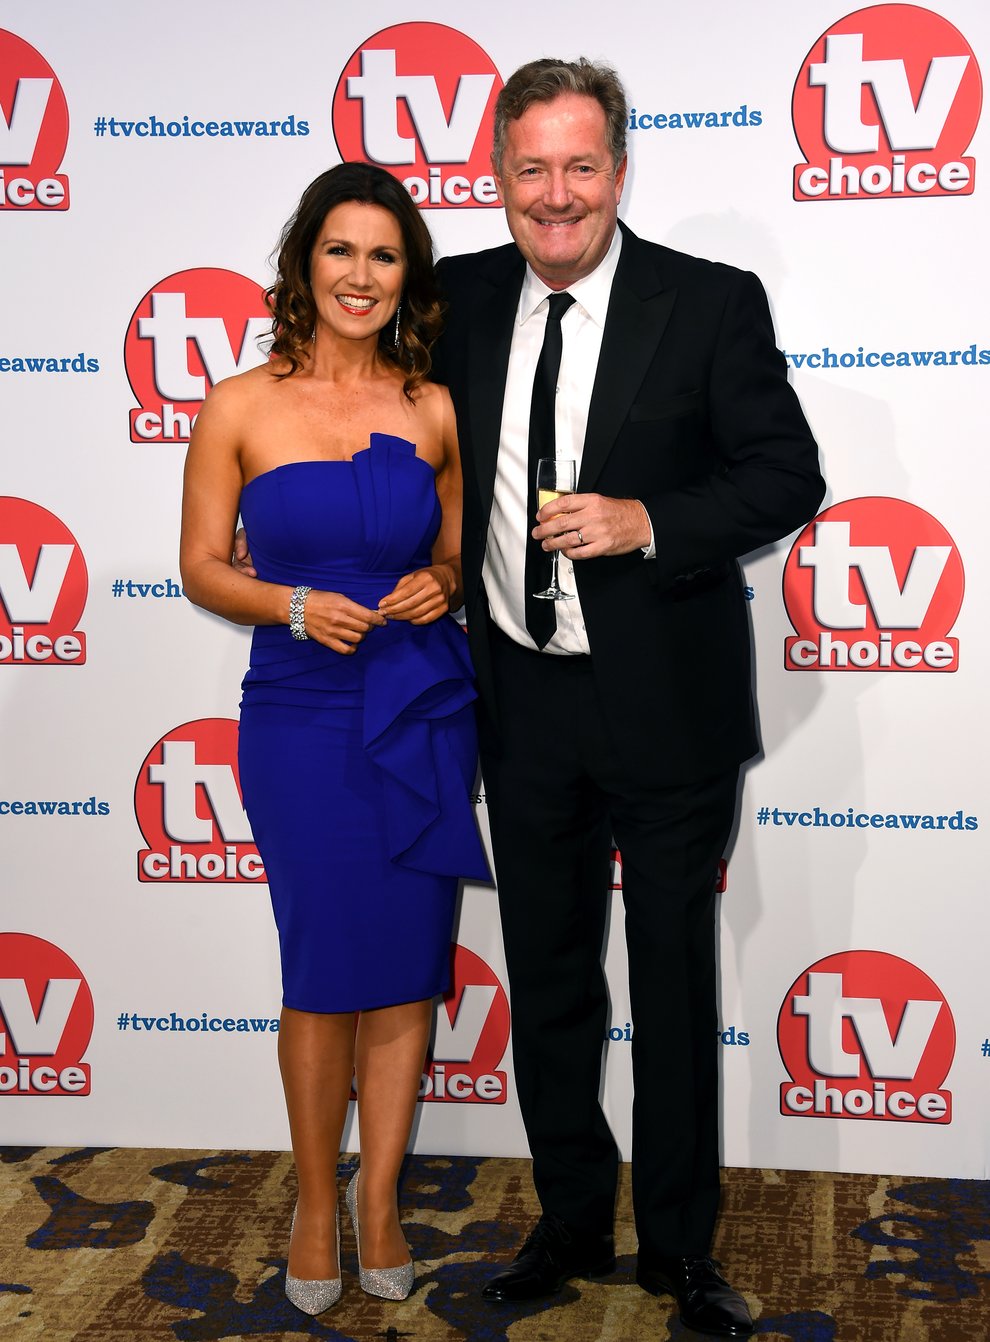 Piers Morgan, pictured with co-presenter Susanna Reid, has vowed to pay NHS workers' hospital parking fines (PA Images)